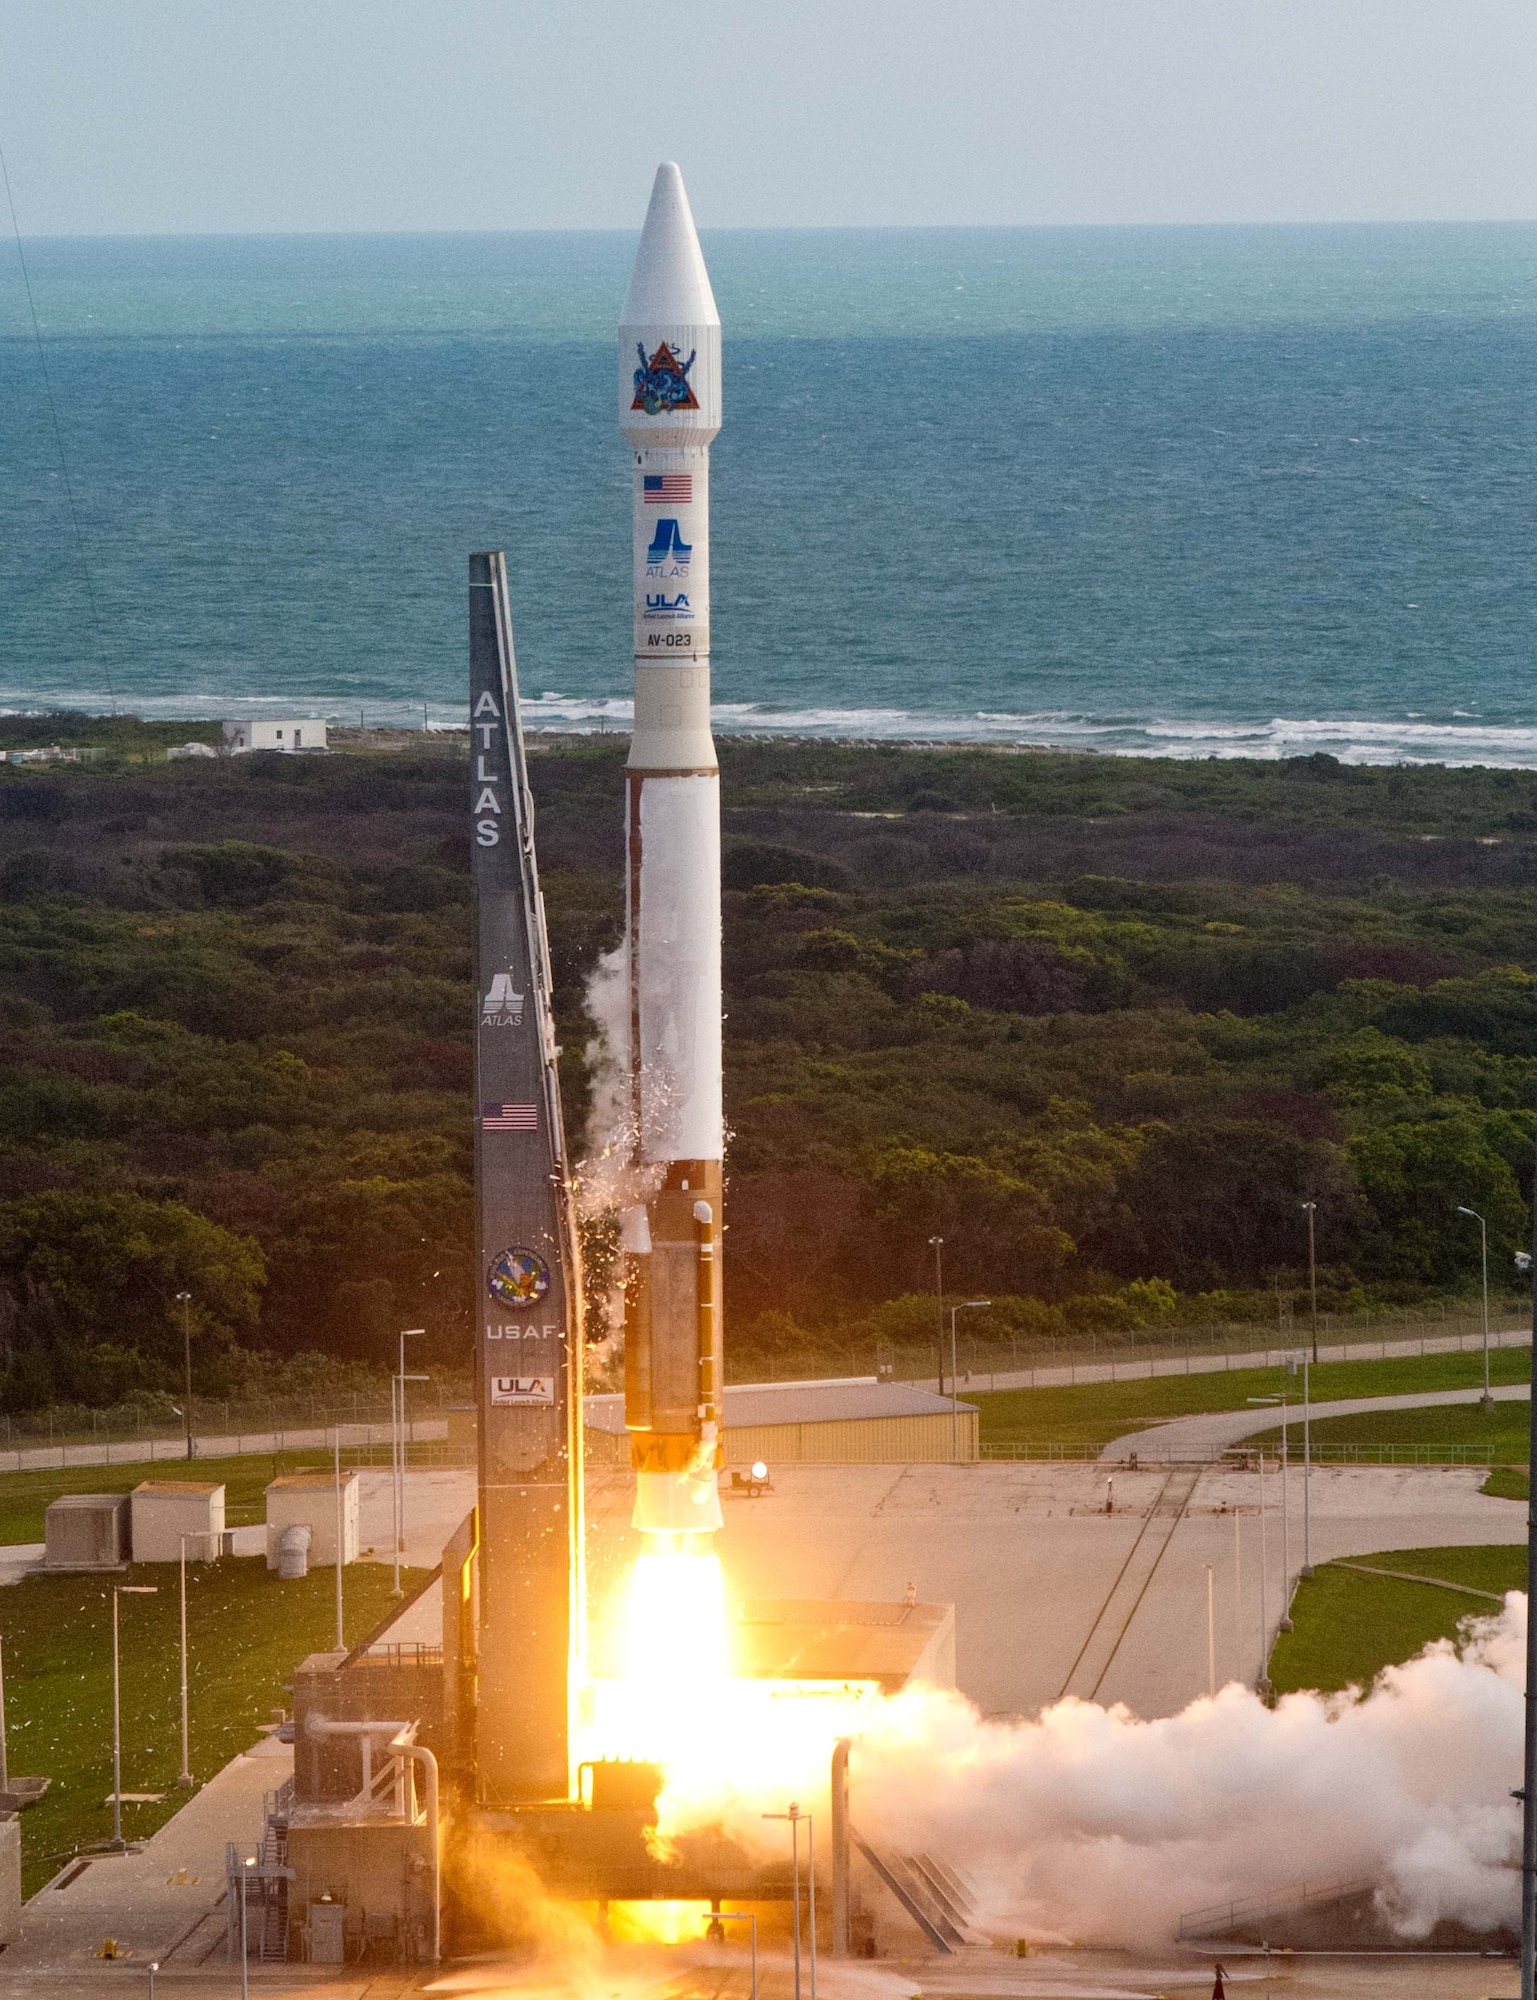 A United Launch Alliance Atlas V rocket carrying a payload for the National
Reconnaissance Office lifted off from Cape Canaveral Air Force Station, Fla., June 20, 2012. Designated NROL-38, the mission is in support of national defense. (United Launch Alliance photo/Pat Corkery)